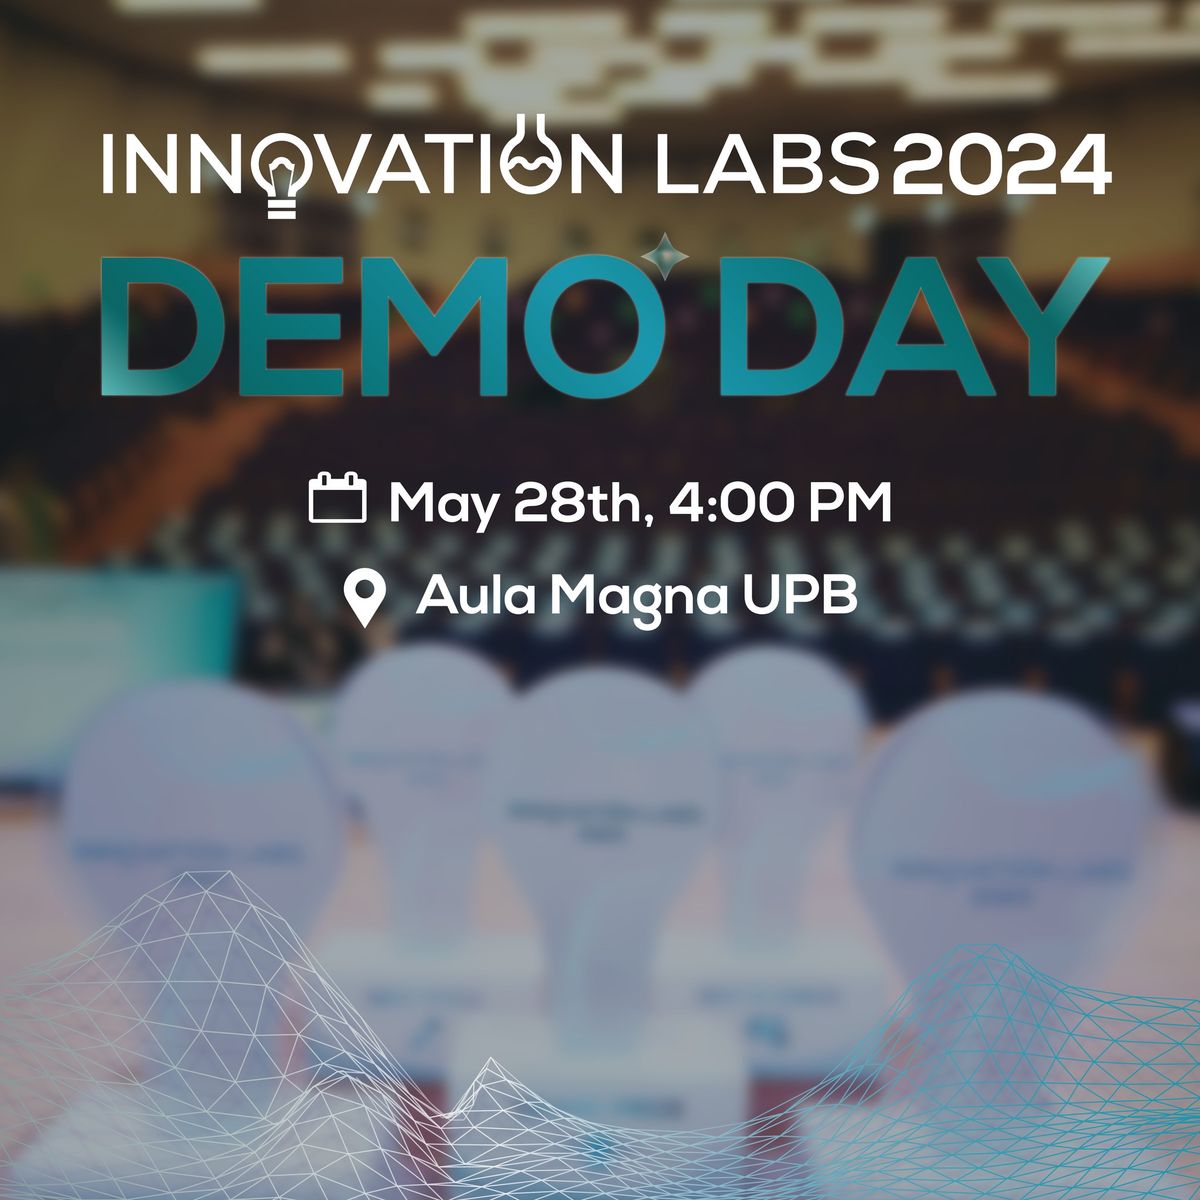 Innovation Labs 2024 Demo Day